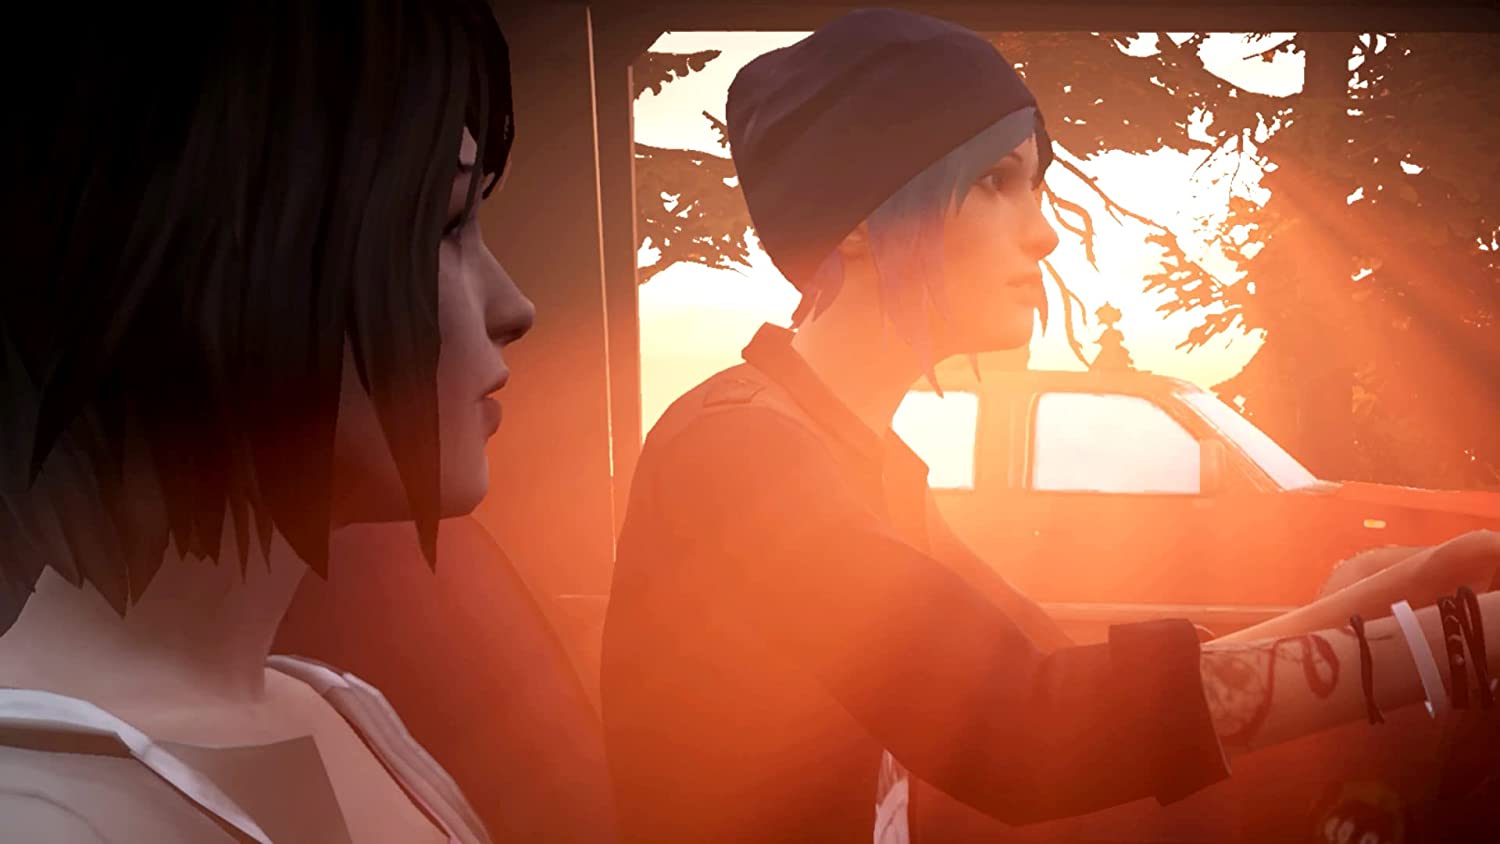 Life is Strange: Arcadia Bay Collection Switch